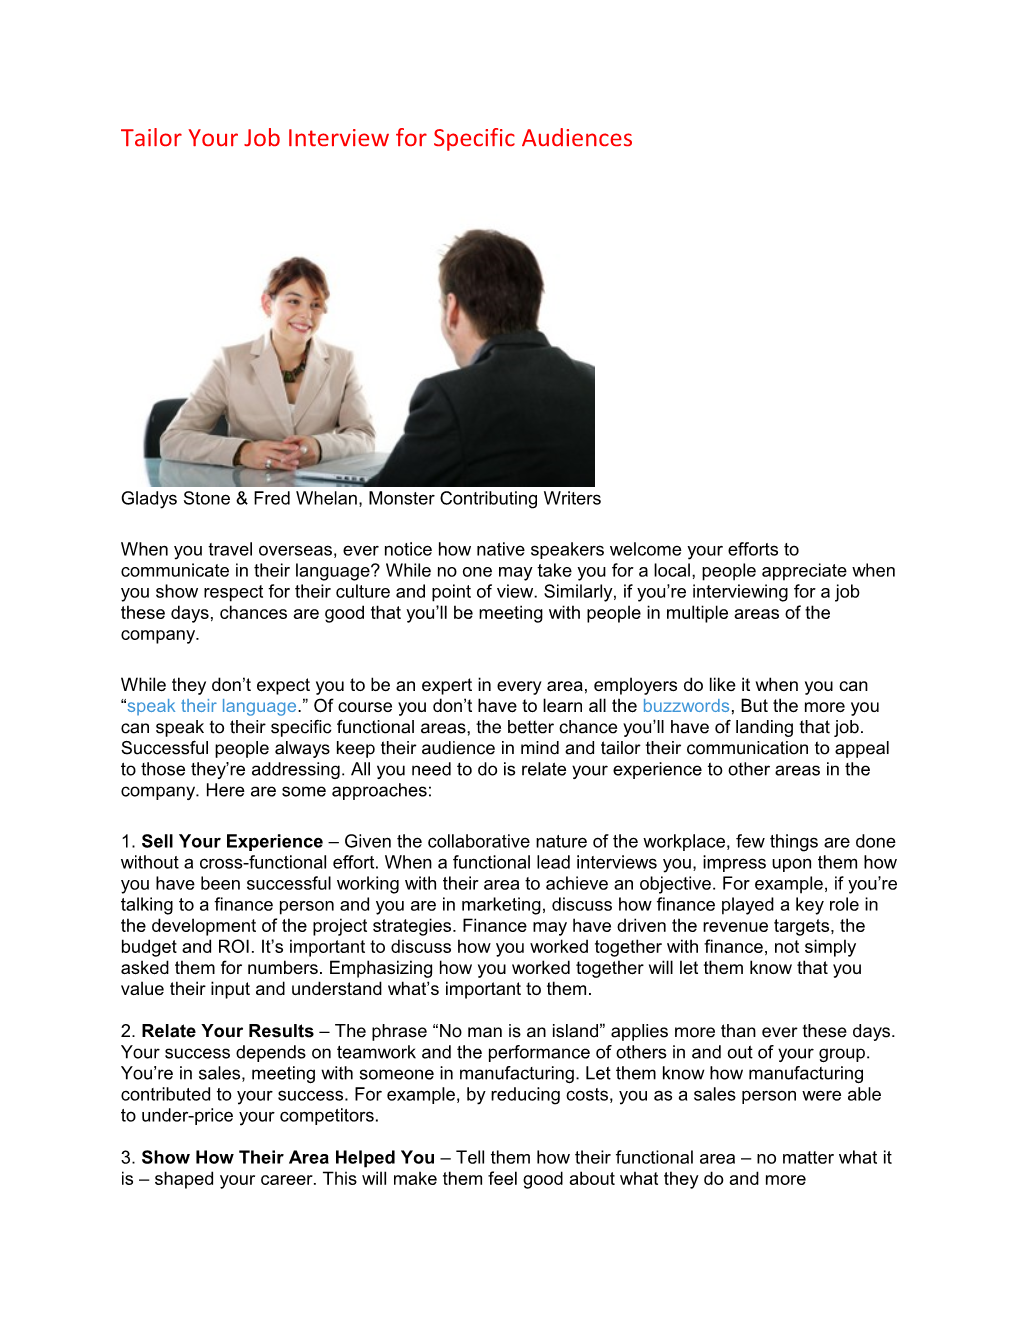 Tailor Your Job Interview For Specific Audiences